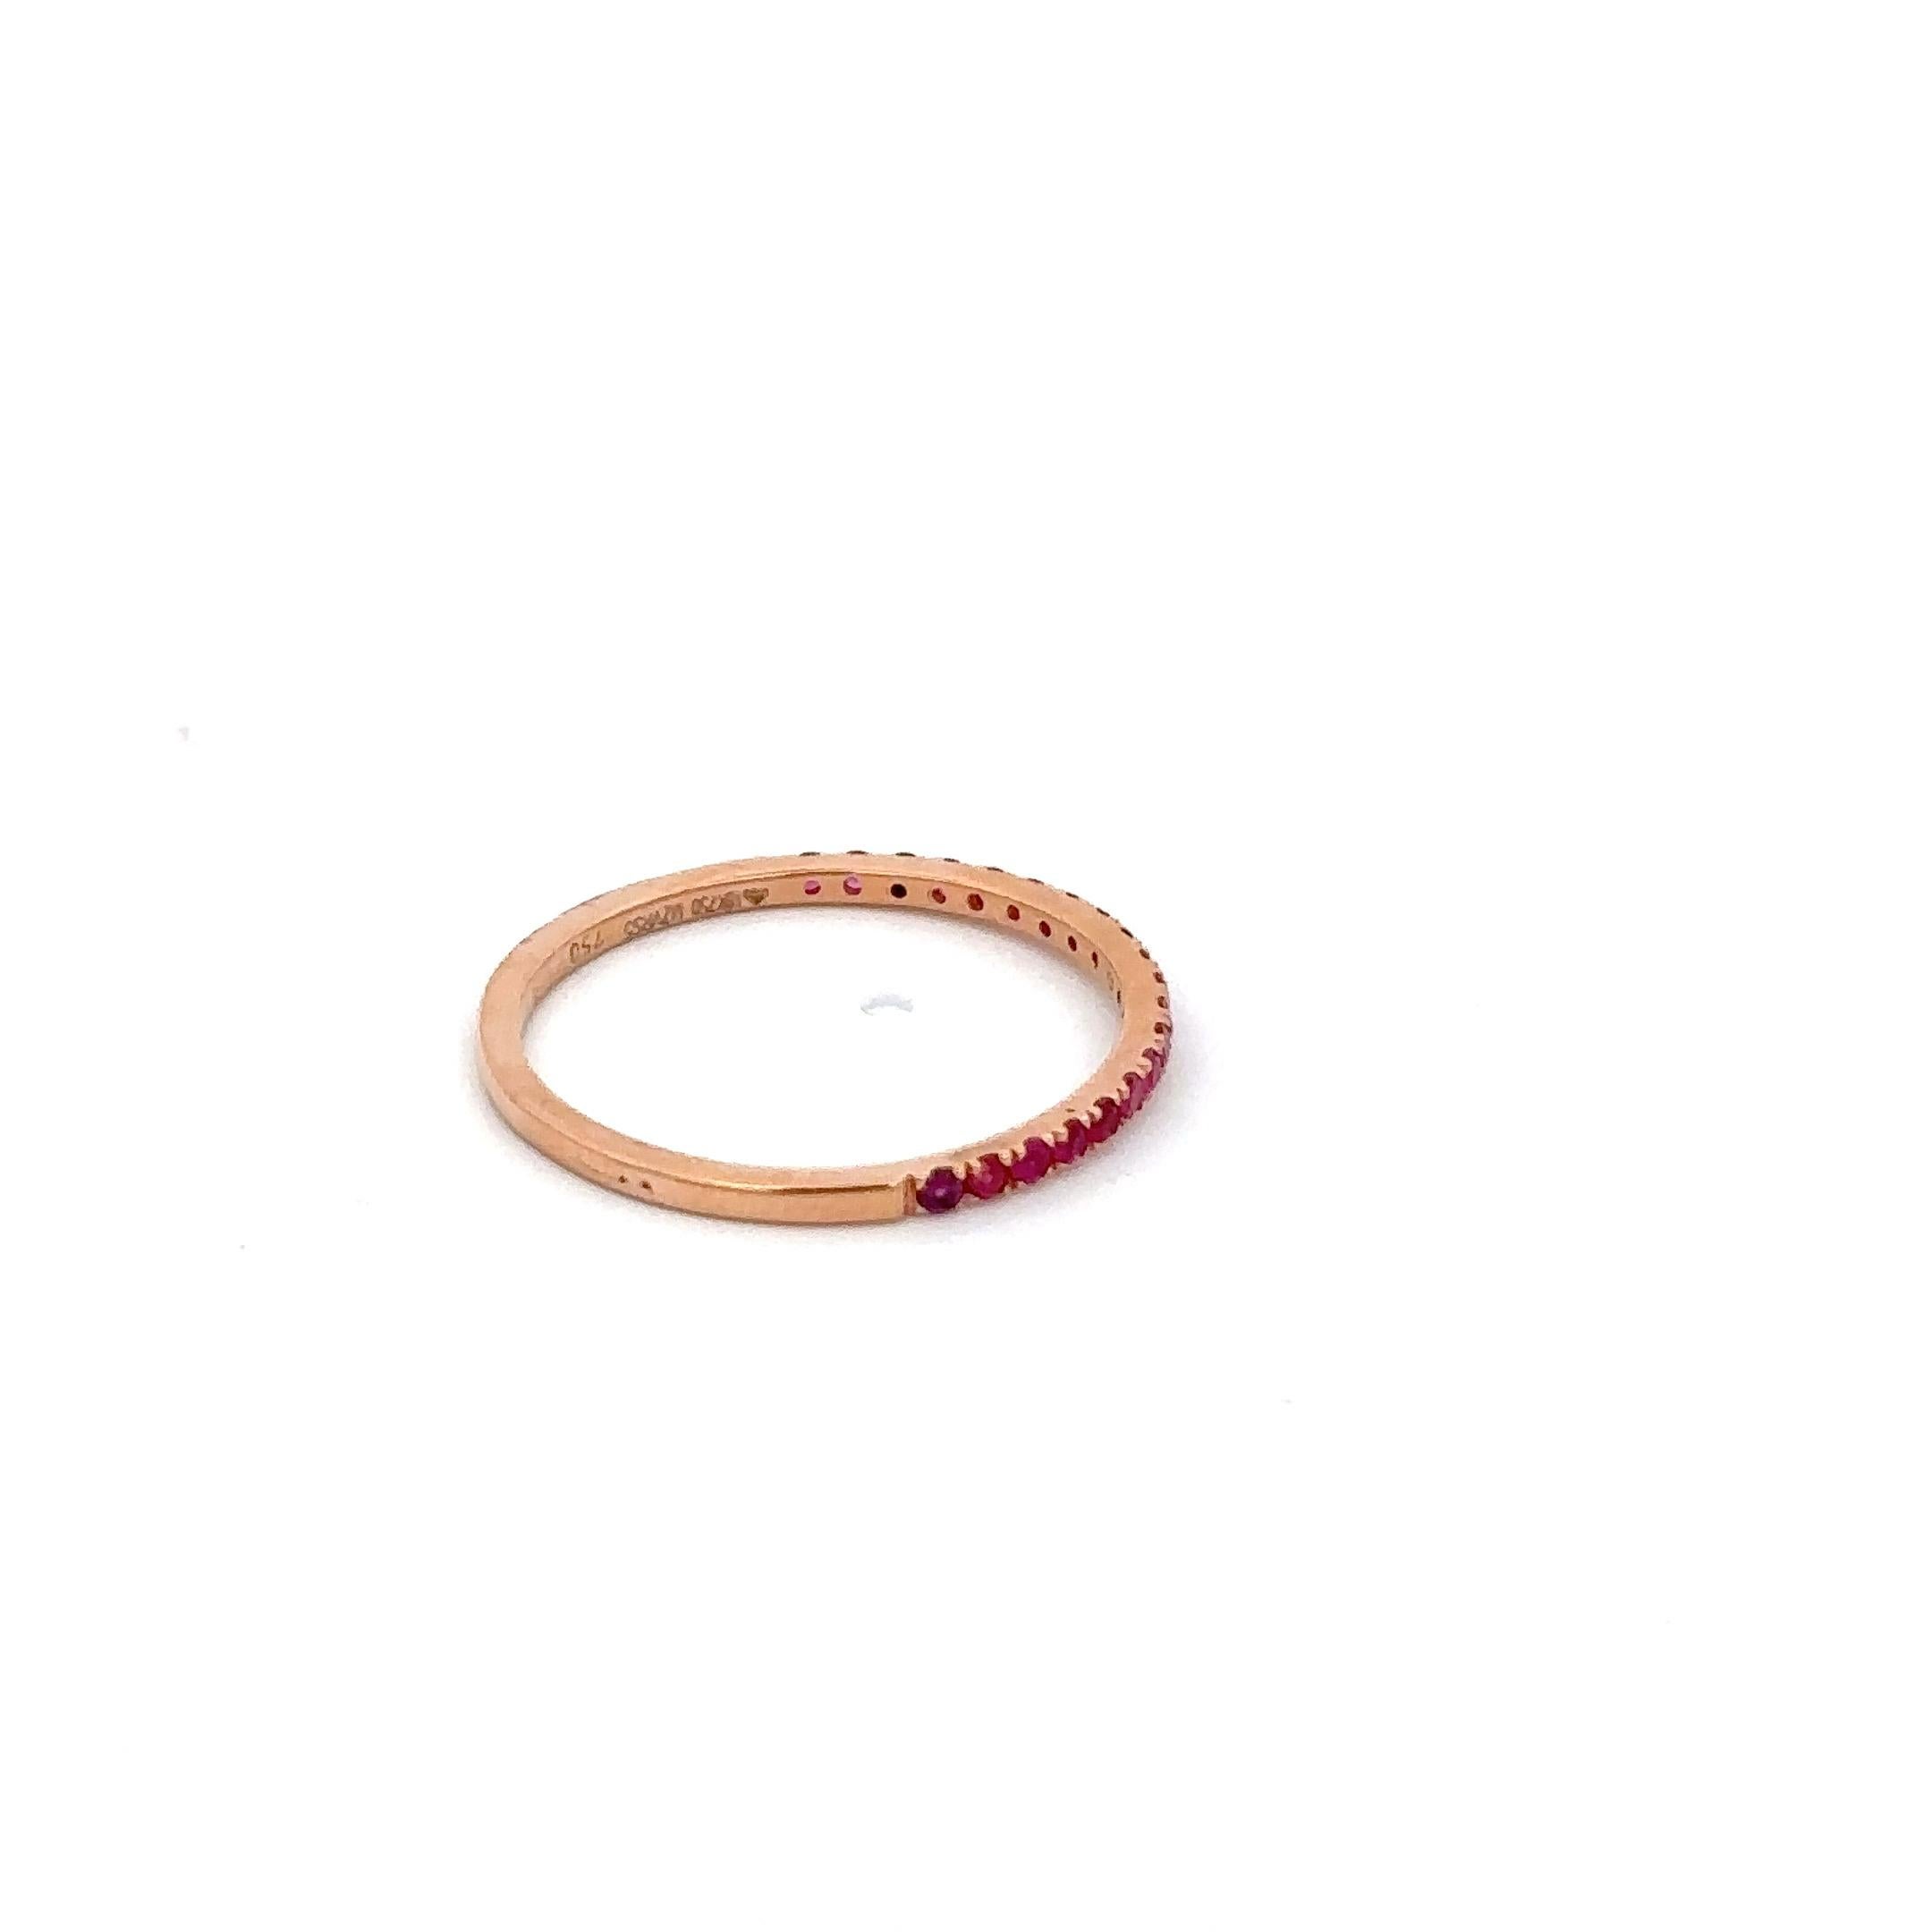 For Sale:  Handcrafted Pave Set Ruby Stacking Band Ring in 18k Solid Rose Gold 7